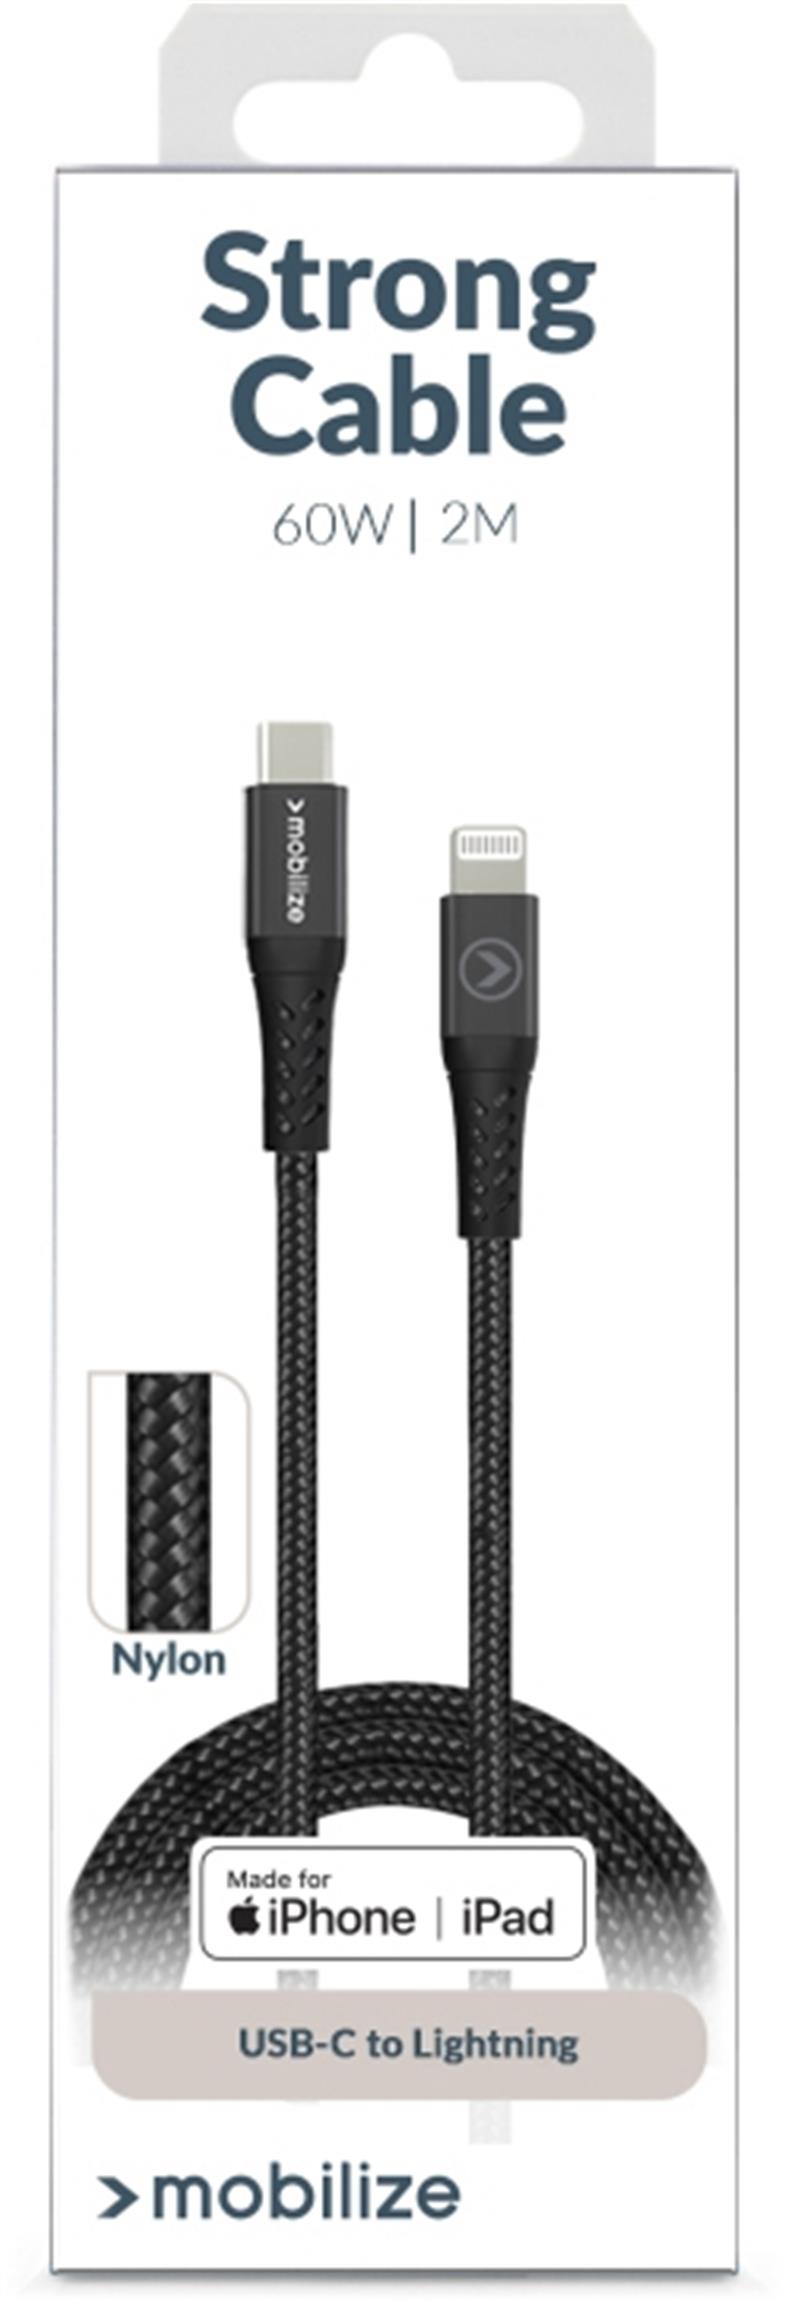 Mobilize Strong Nylon Cable USB-C to MFi Lightning 2m 60W Black